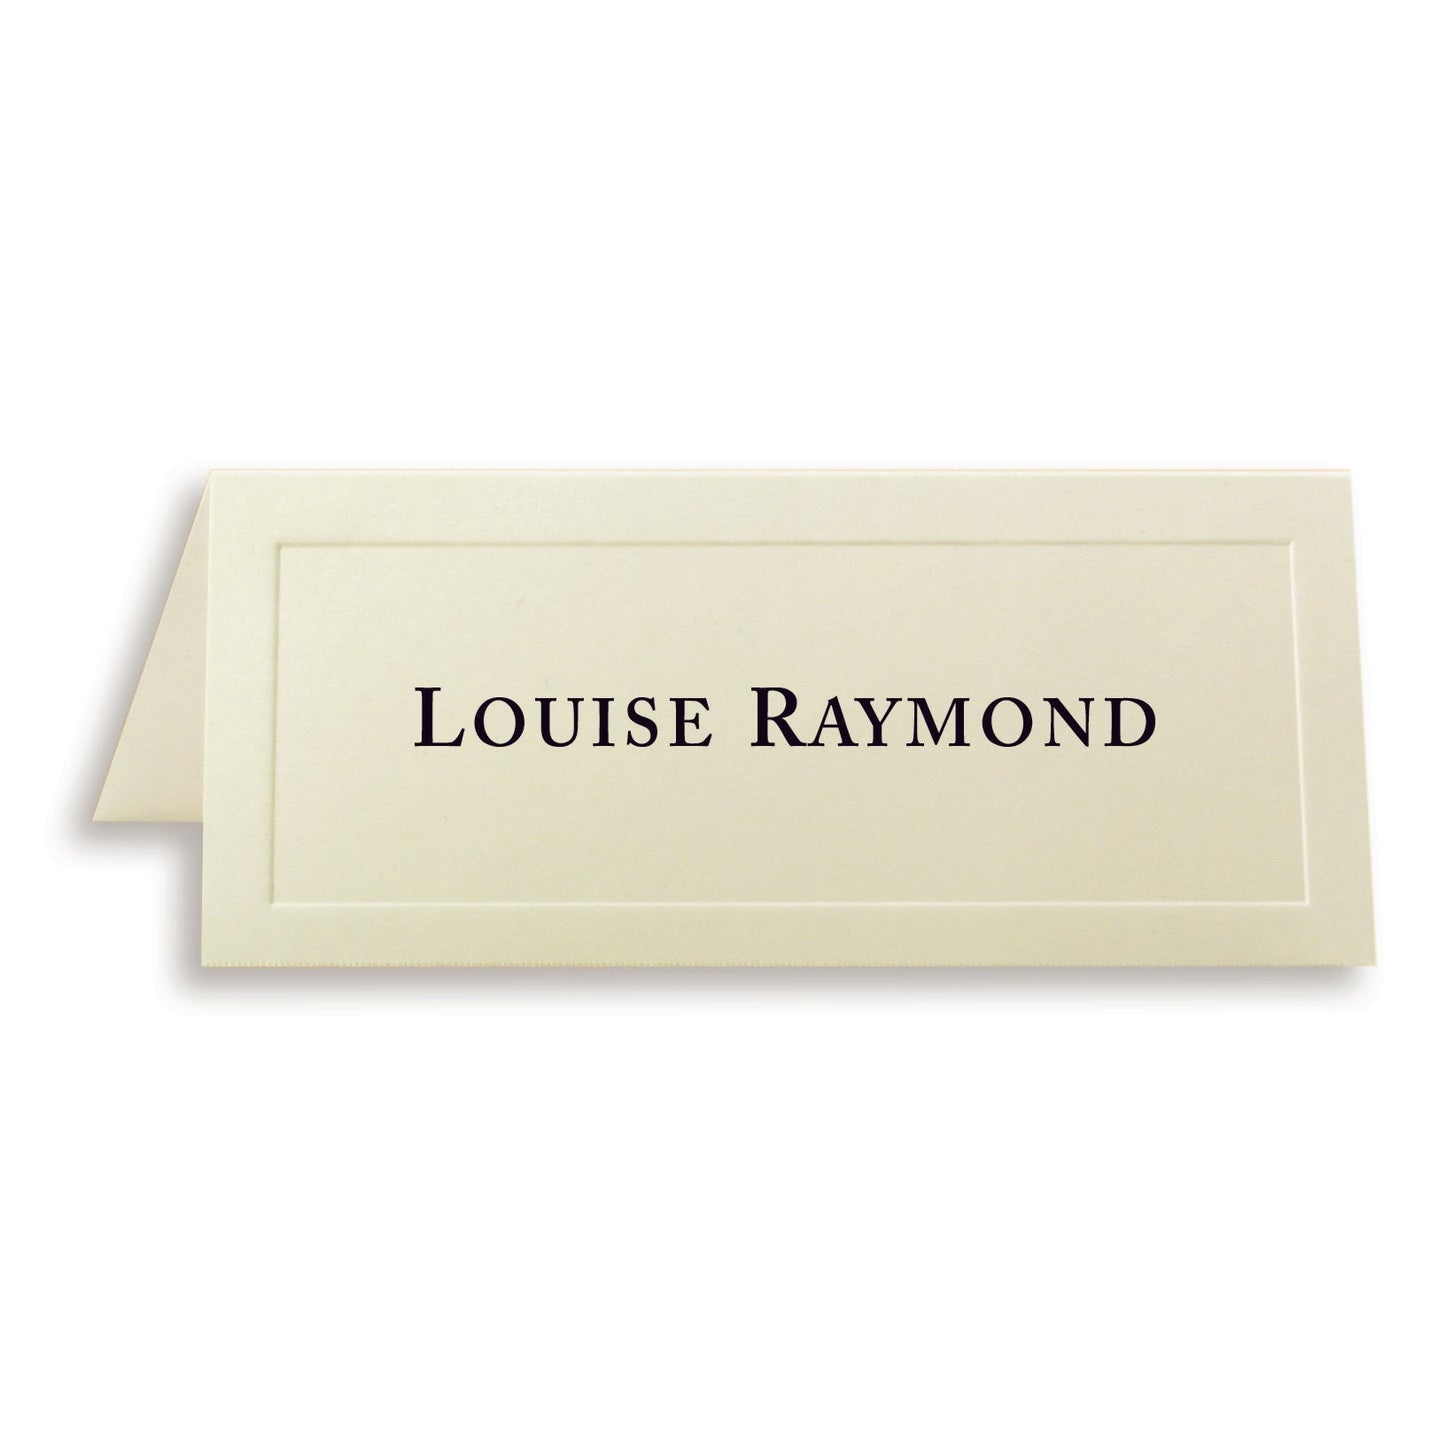 St. James® Overtures® Traditional Embossed Place Cards, Ivory, Pack of 60, 71414